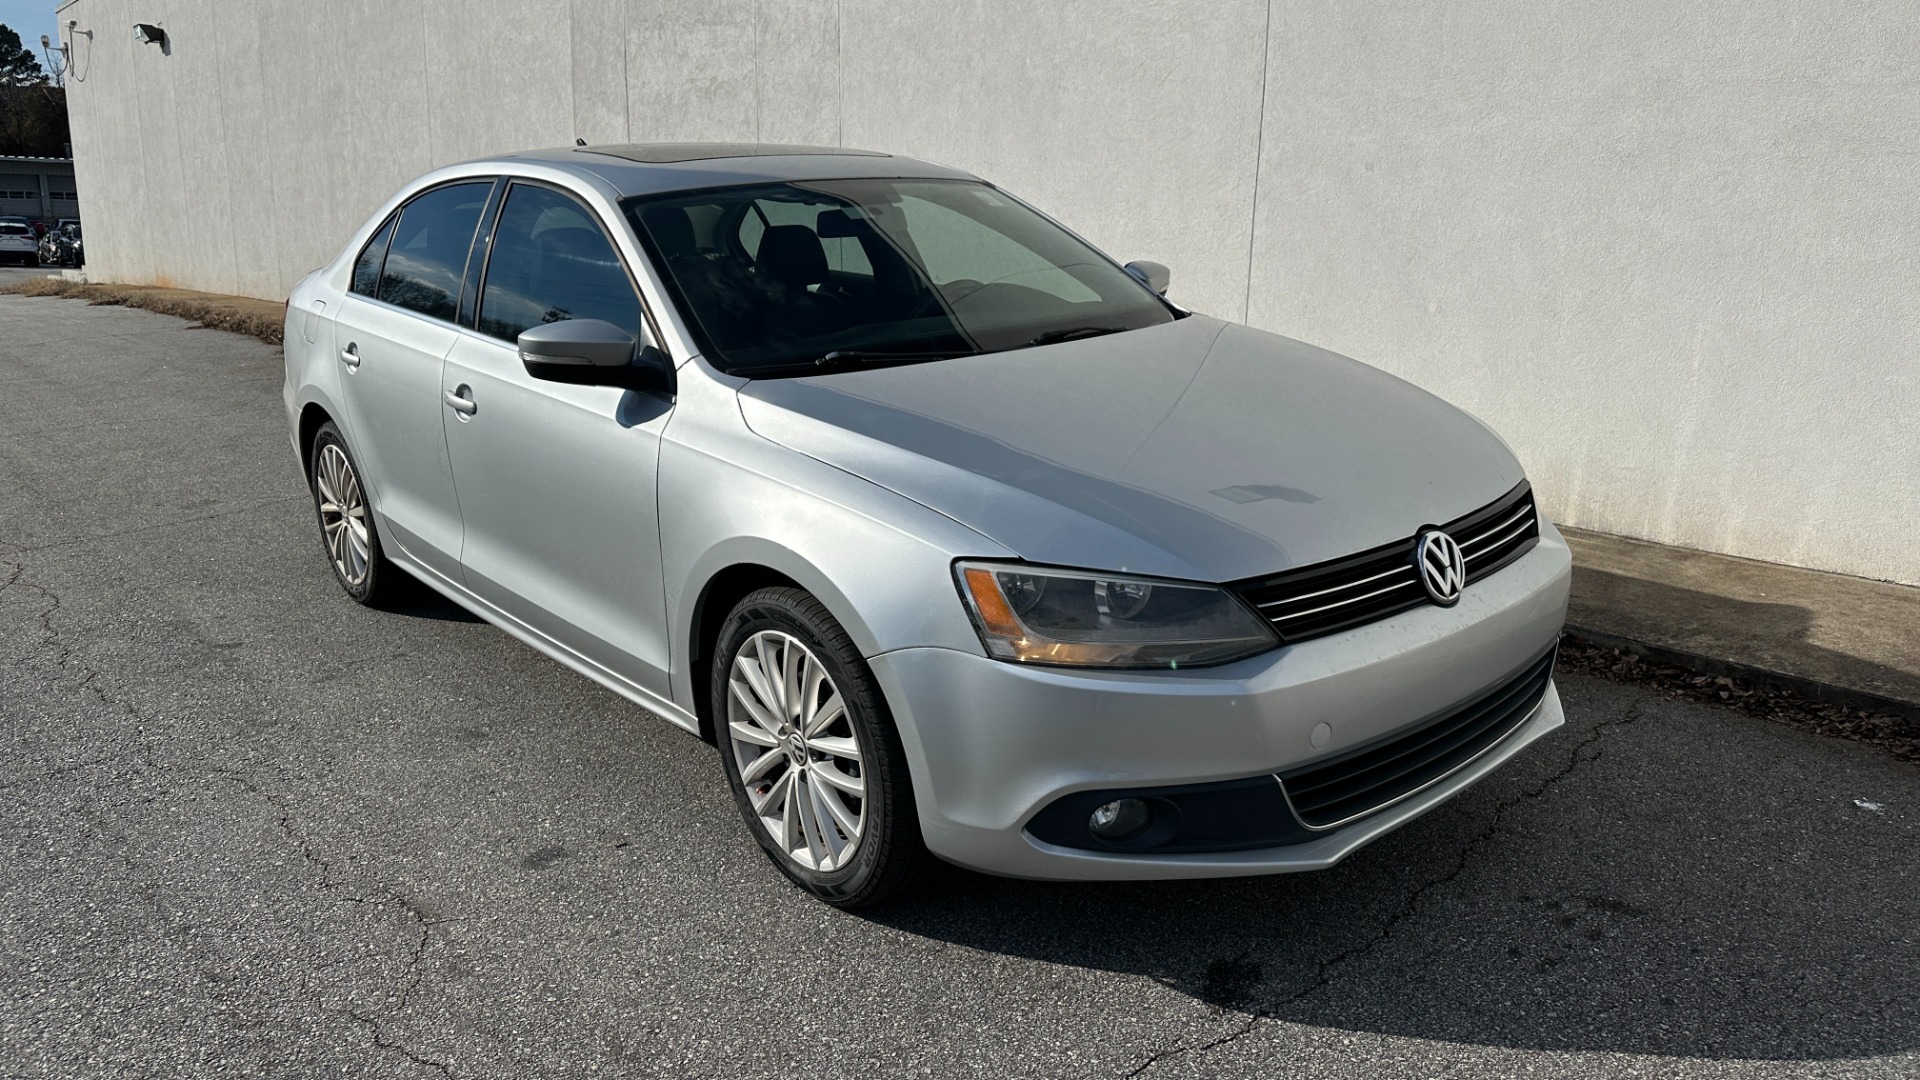 Used 2011 Volkswagen Jetta Sedan SEL / LEATHER / SUNROOF / BLUETOOTH for sale $7,995 at Formula Imports in Charlotte NC 28227 6